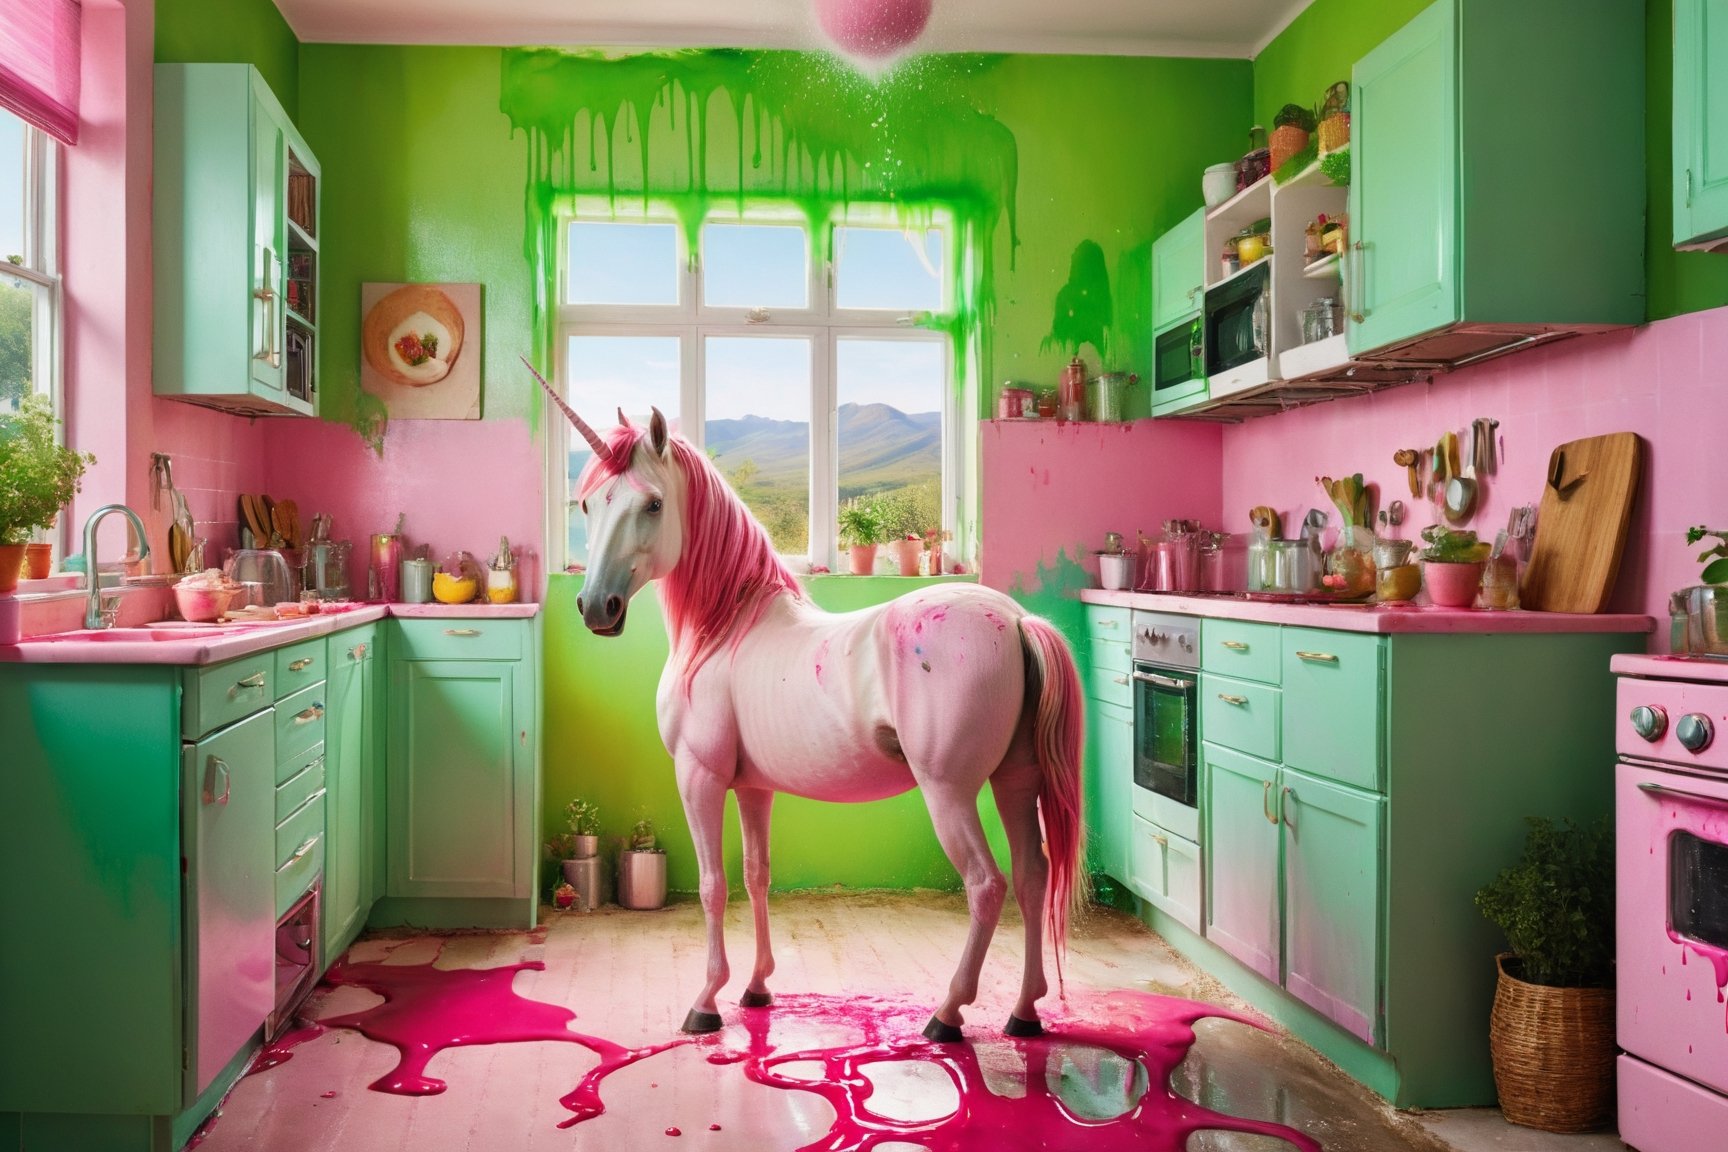 an unicorn stands in an green colored kitchen in an image with a pink splash, in the style of photo-realistic landscapes, patricia piccinini, daria endresen, mommy's on-the-phonecore, ad posters, national geographic photo, dripping paint -